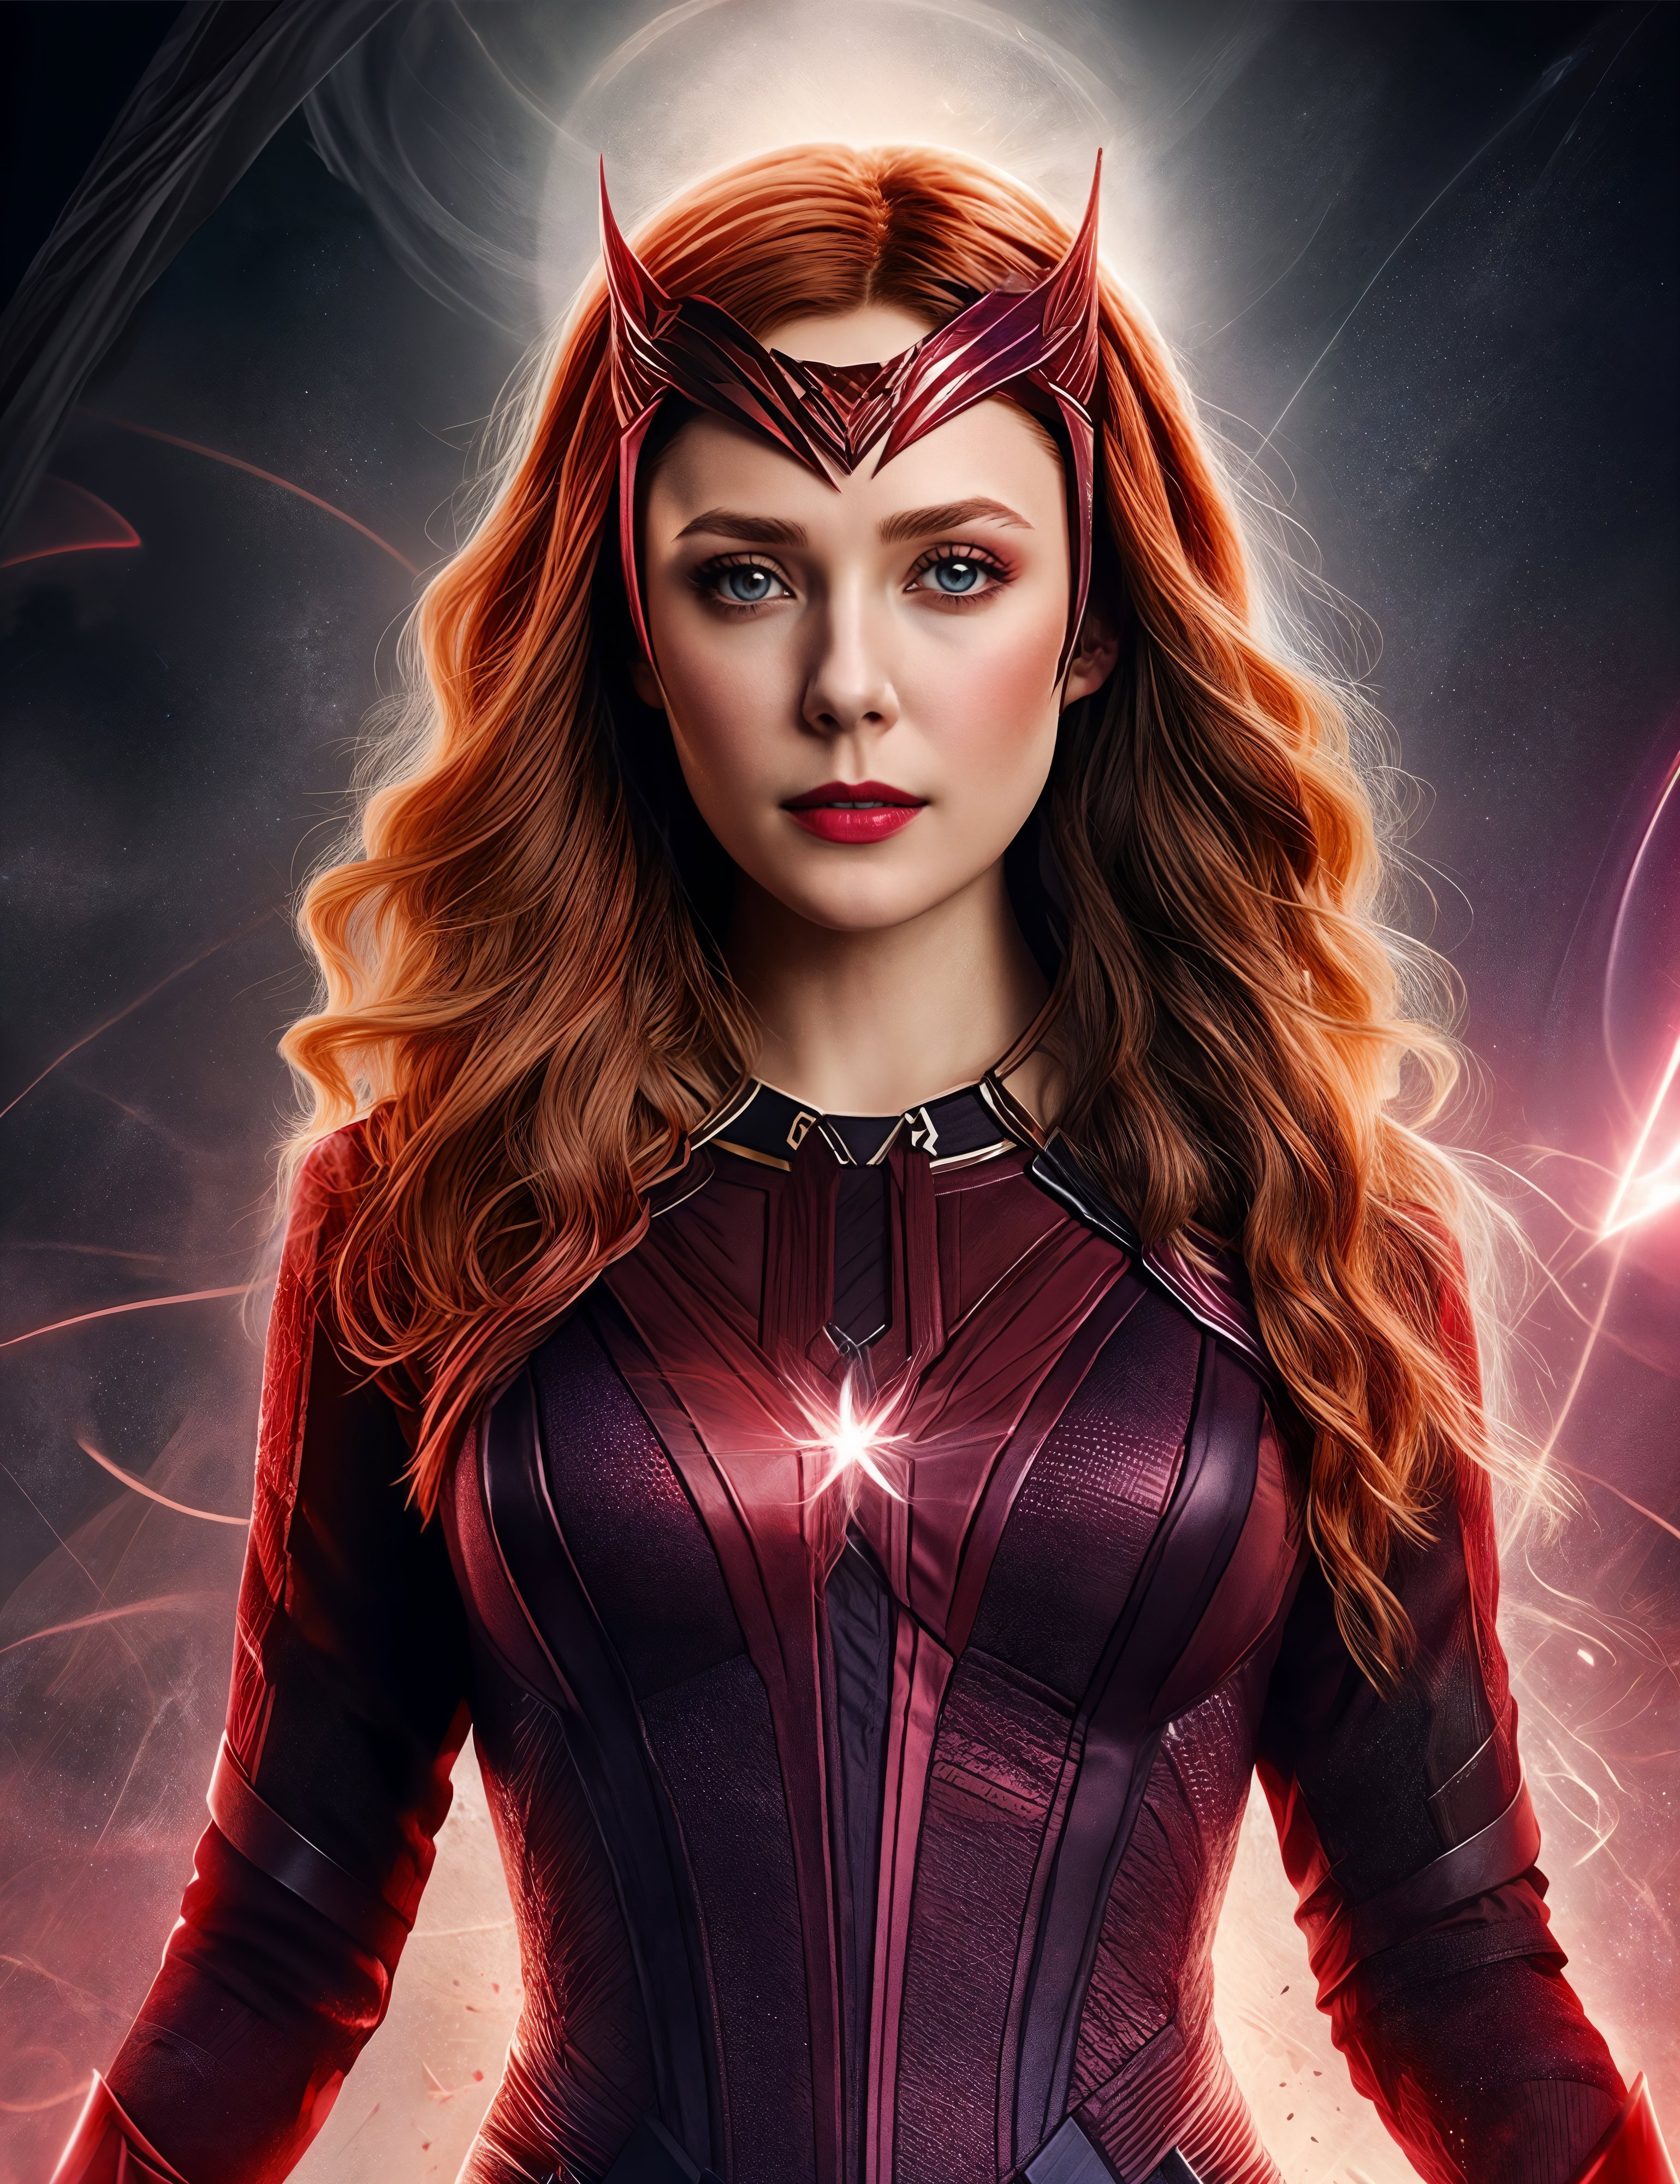 Scarlet Witch image by Digital_Art_AI